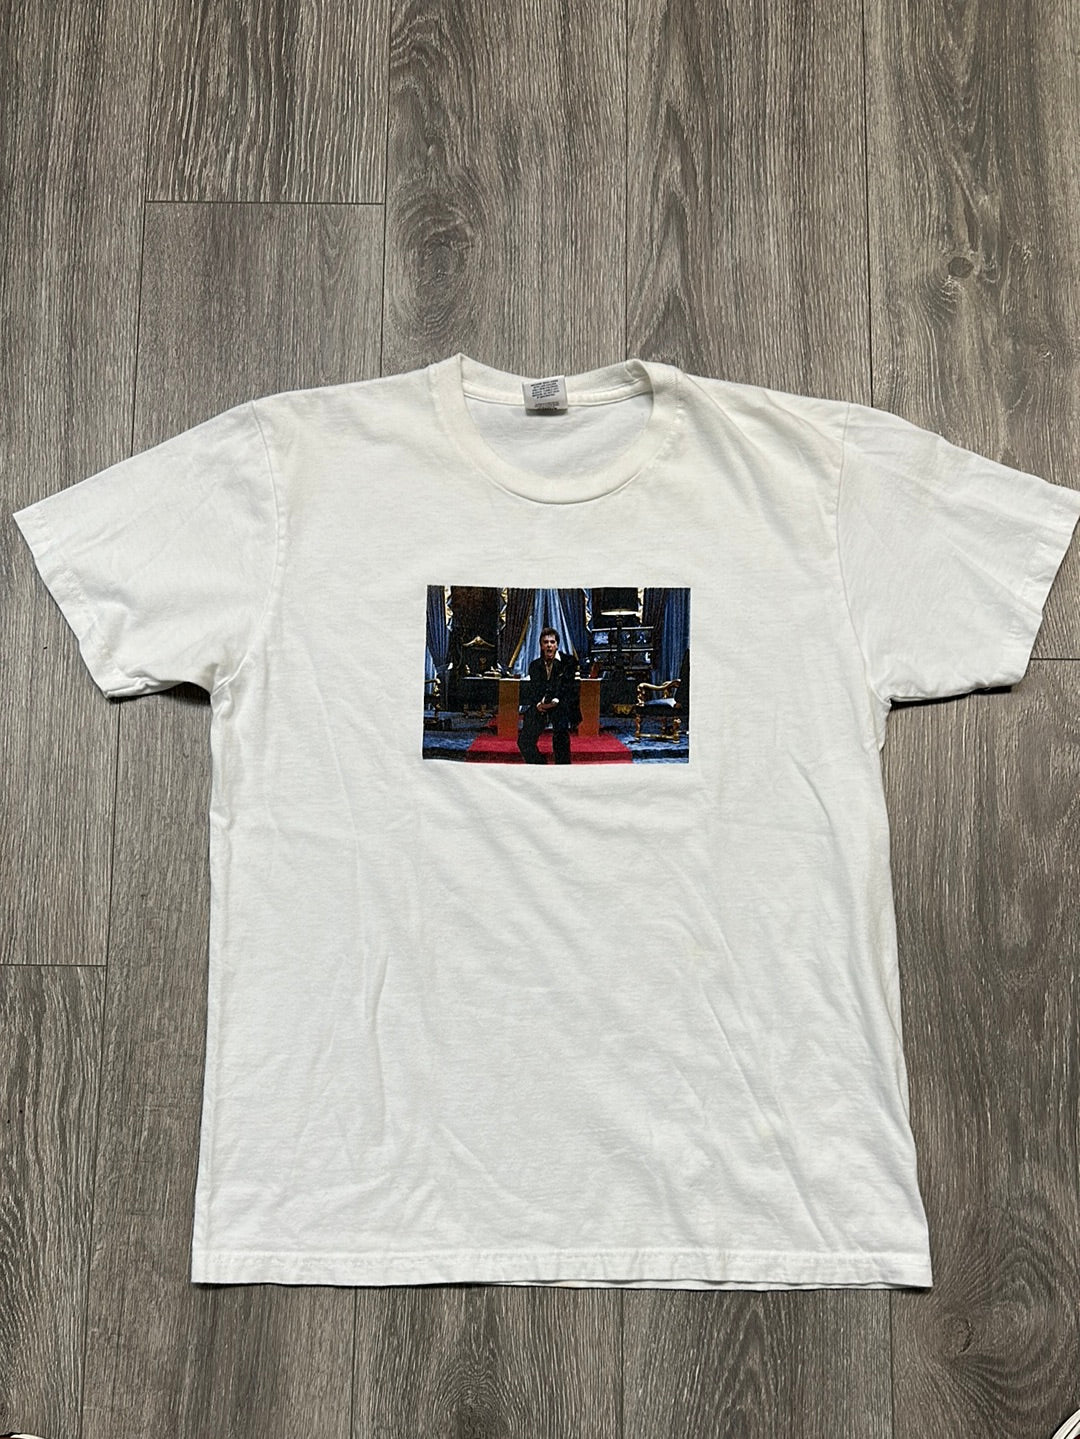 Supreme Scarface Friend Tee White (Used)